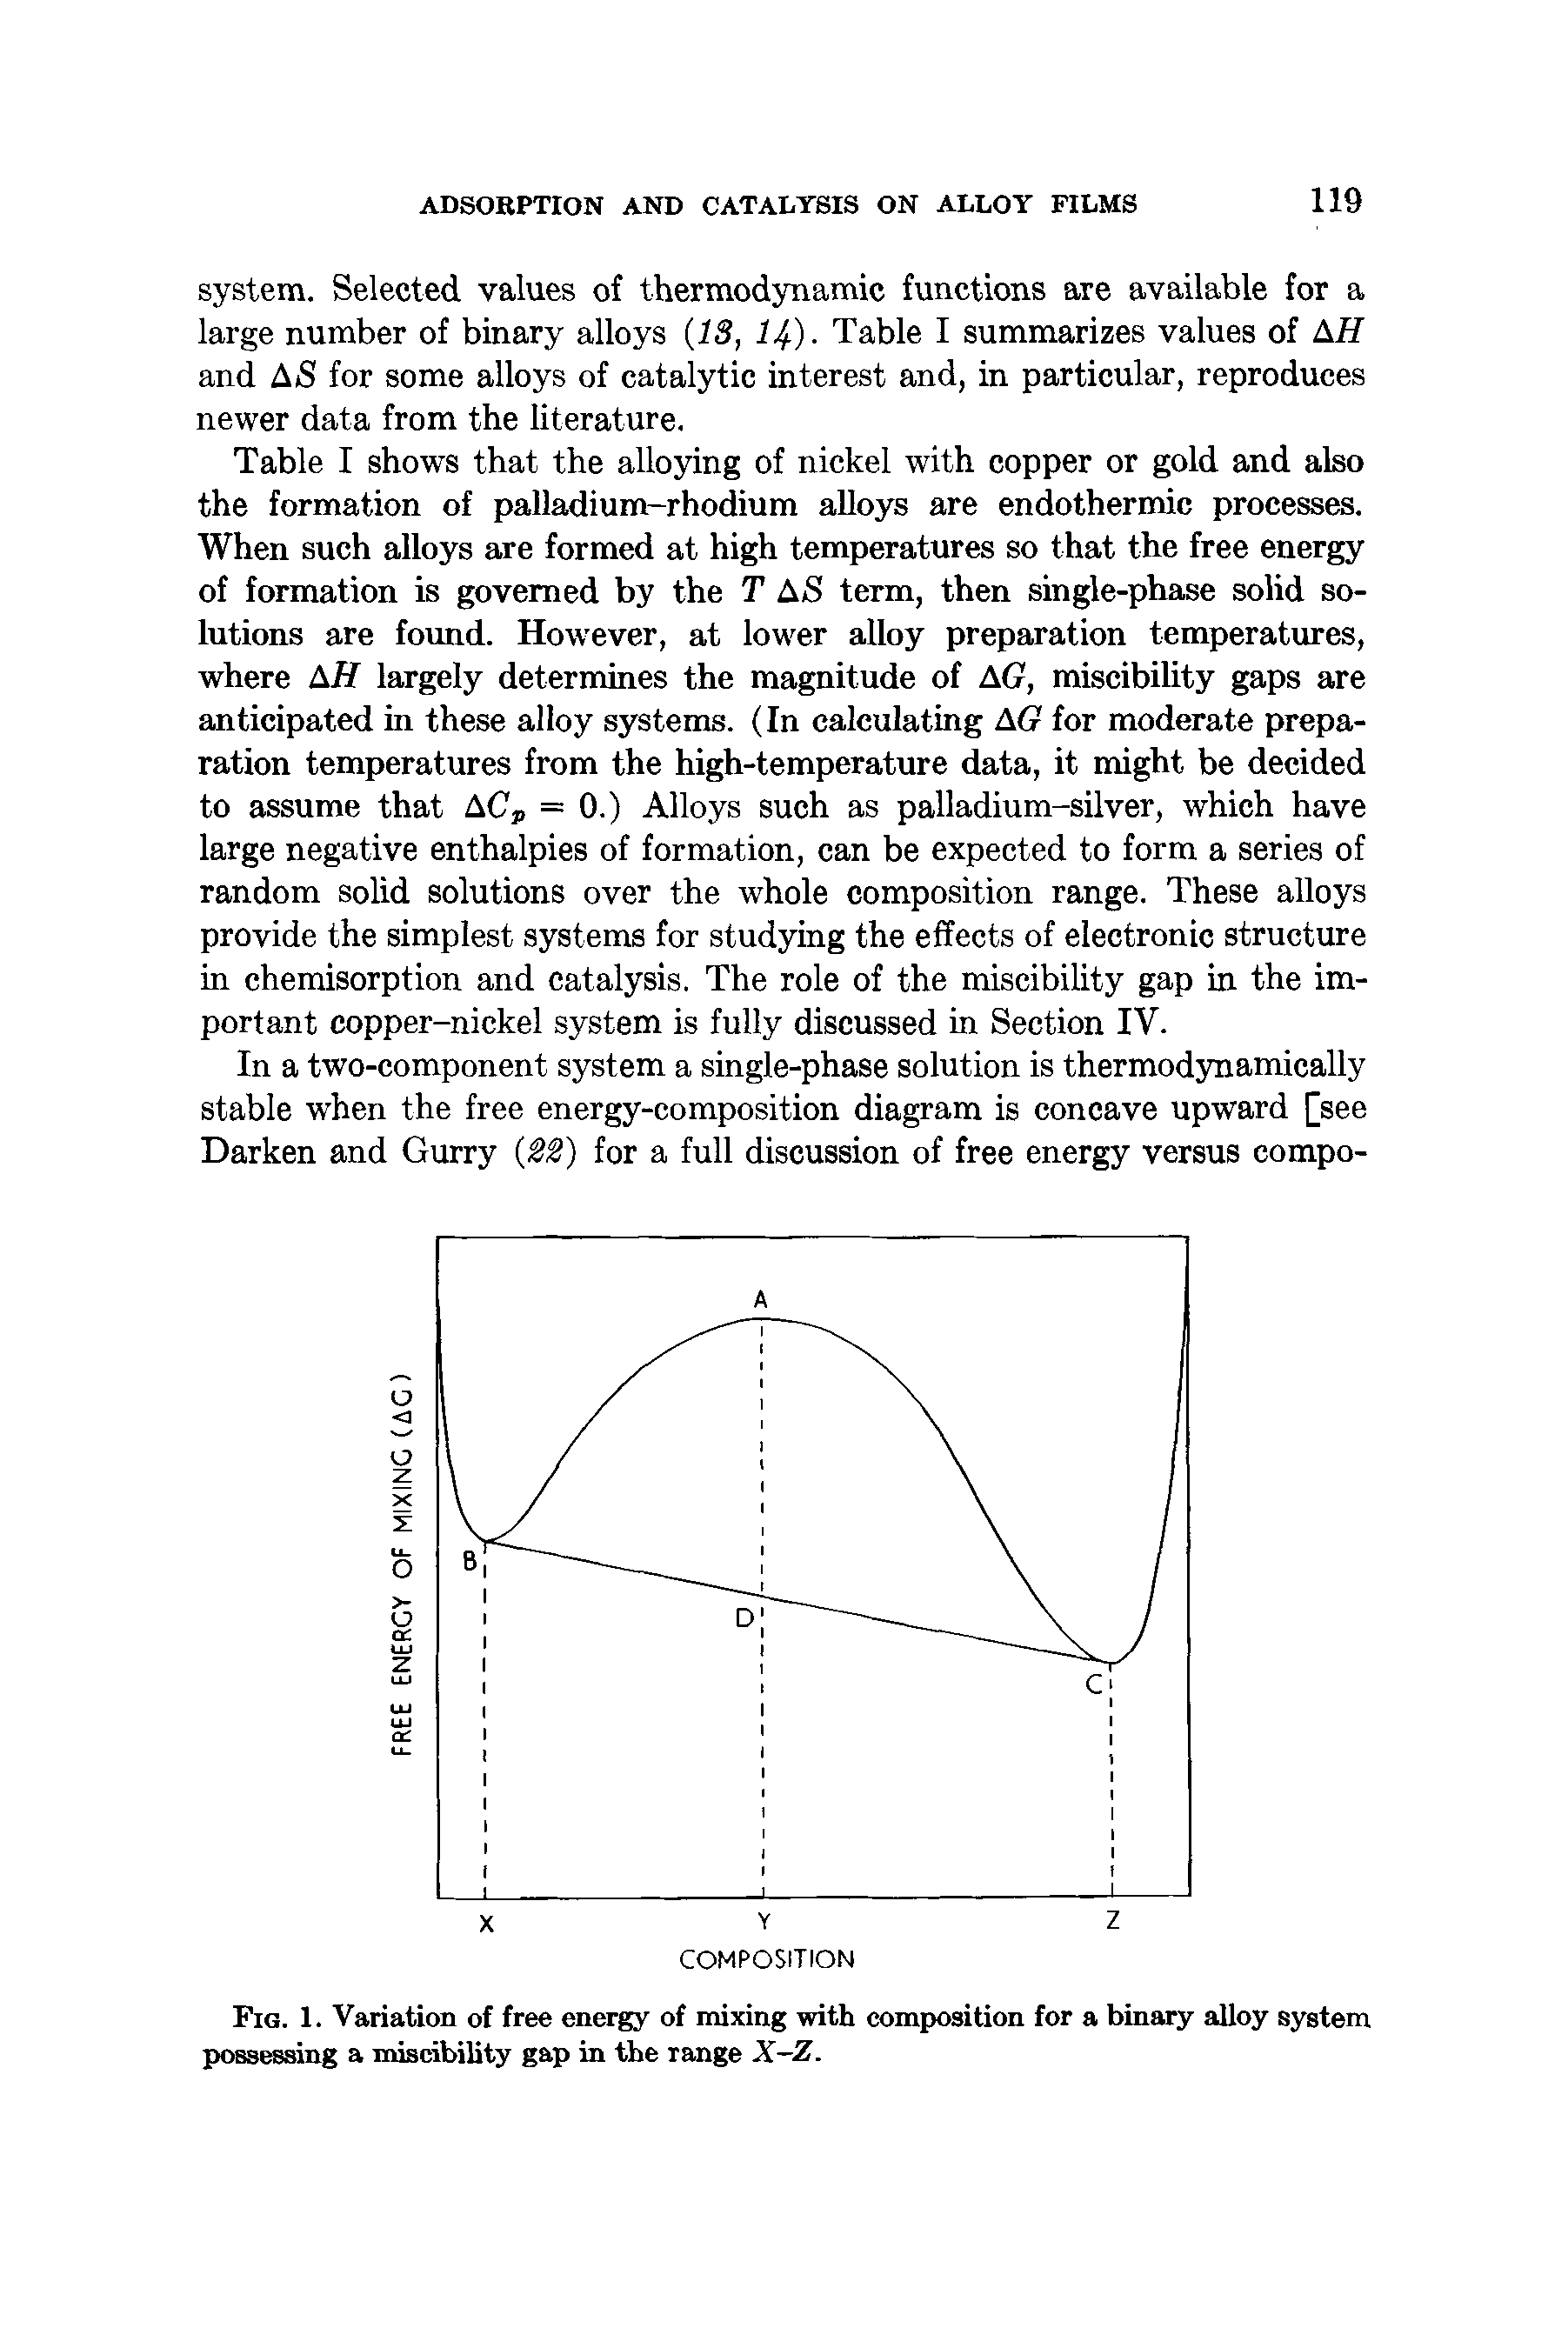 Fig. 1. Variation of free energy of mixing with composition for a binary alloy system possessing a miscibility gap in the range X-Z.